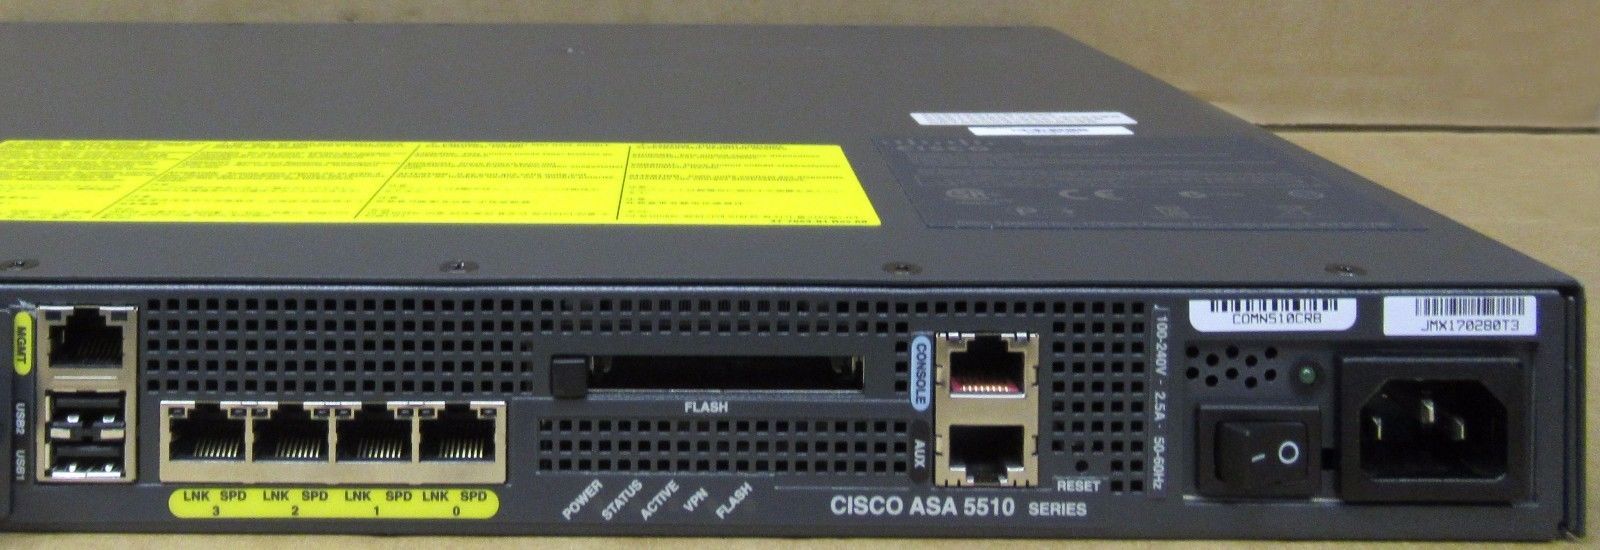 Asa 5510 security plus license anyconnect